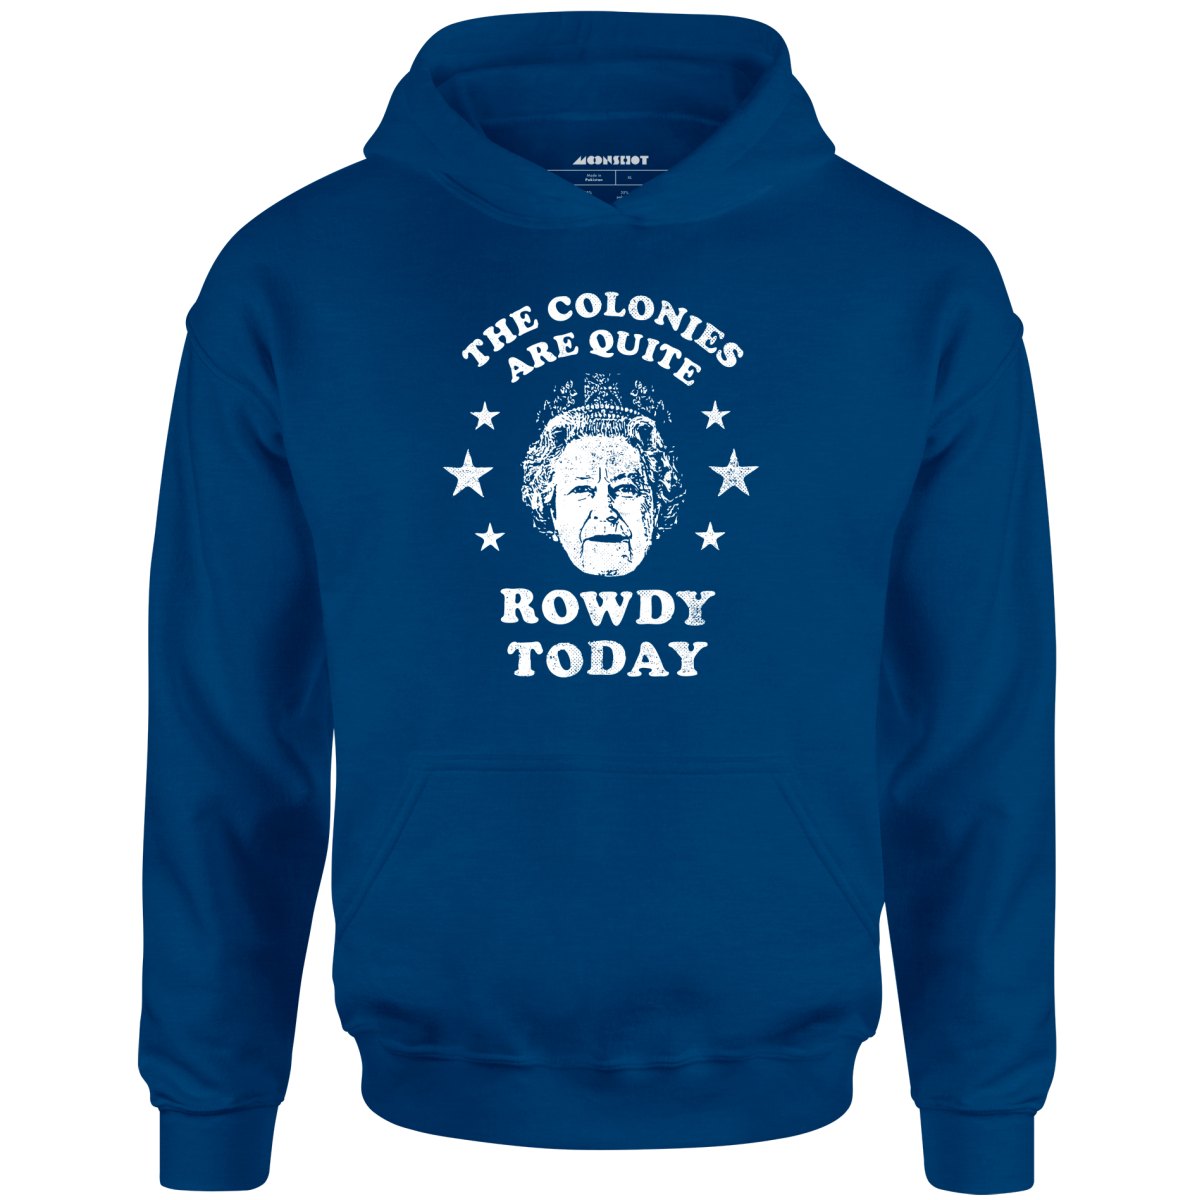 The Colonies Are Quite Rowdy Today - Unisex Hoodie